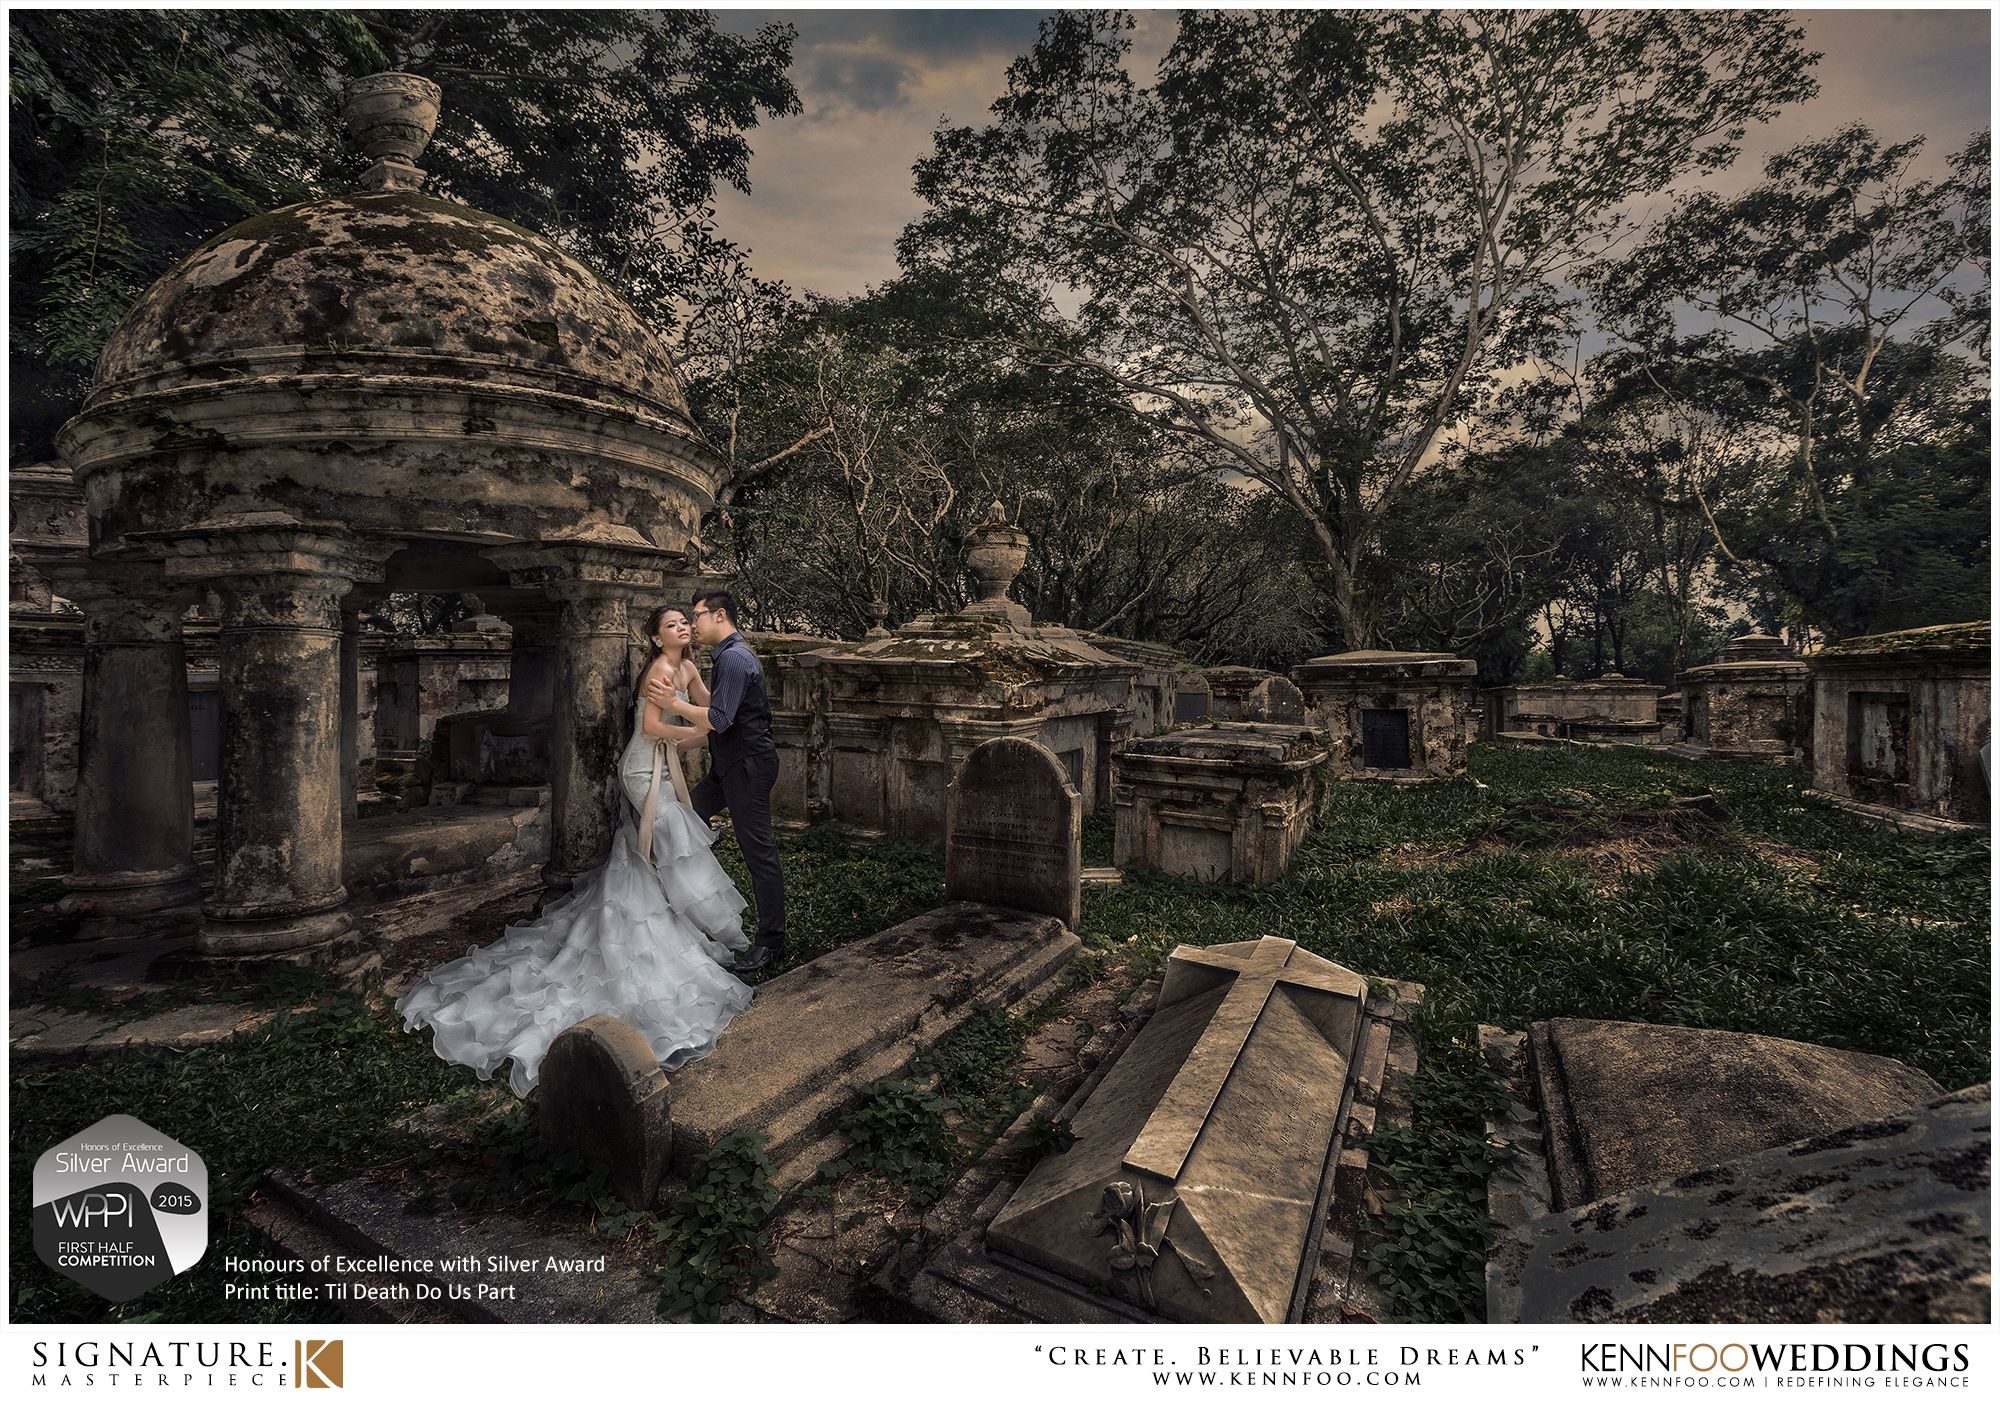 Honours of Excellence with Silver Award - WPPI First Half 2015 Online Competition (Wedding & Portrait Photographers International). KENNFOO Weddings. Source.